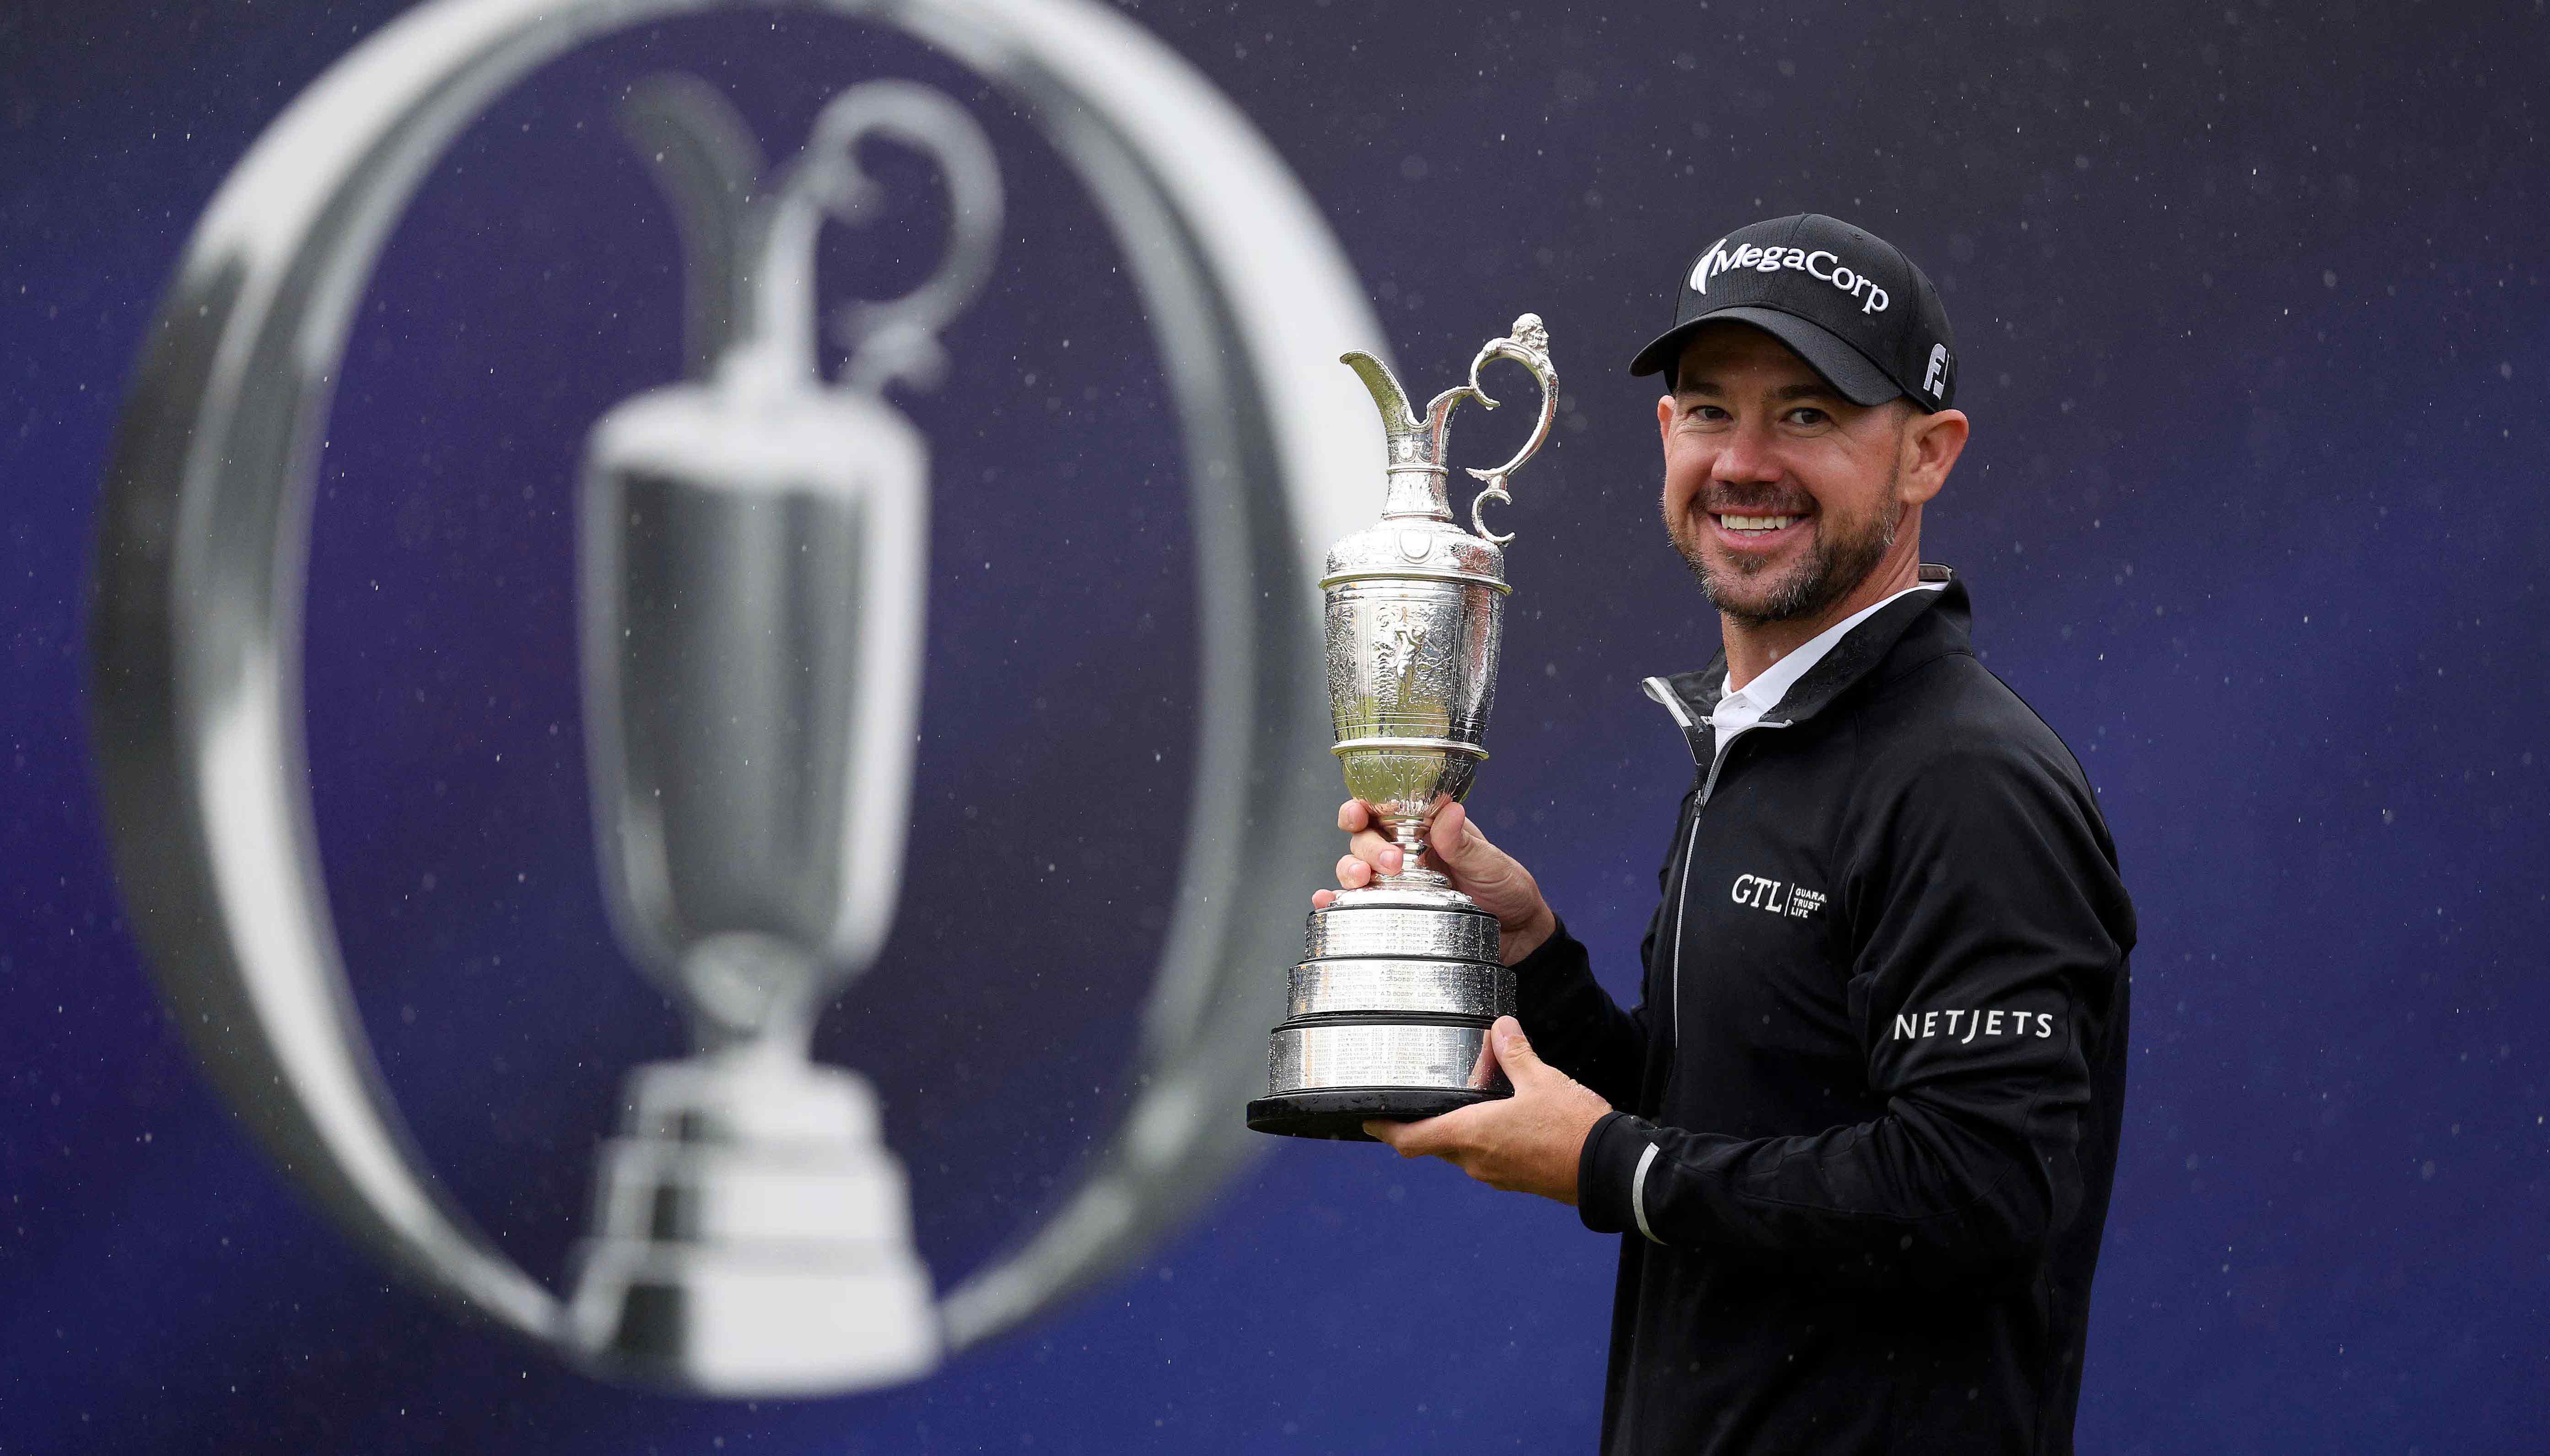 The First Look: The 152nd Open Championship